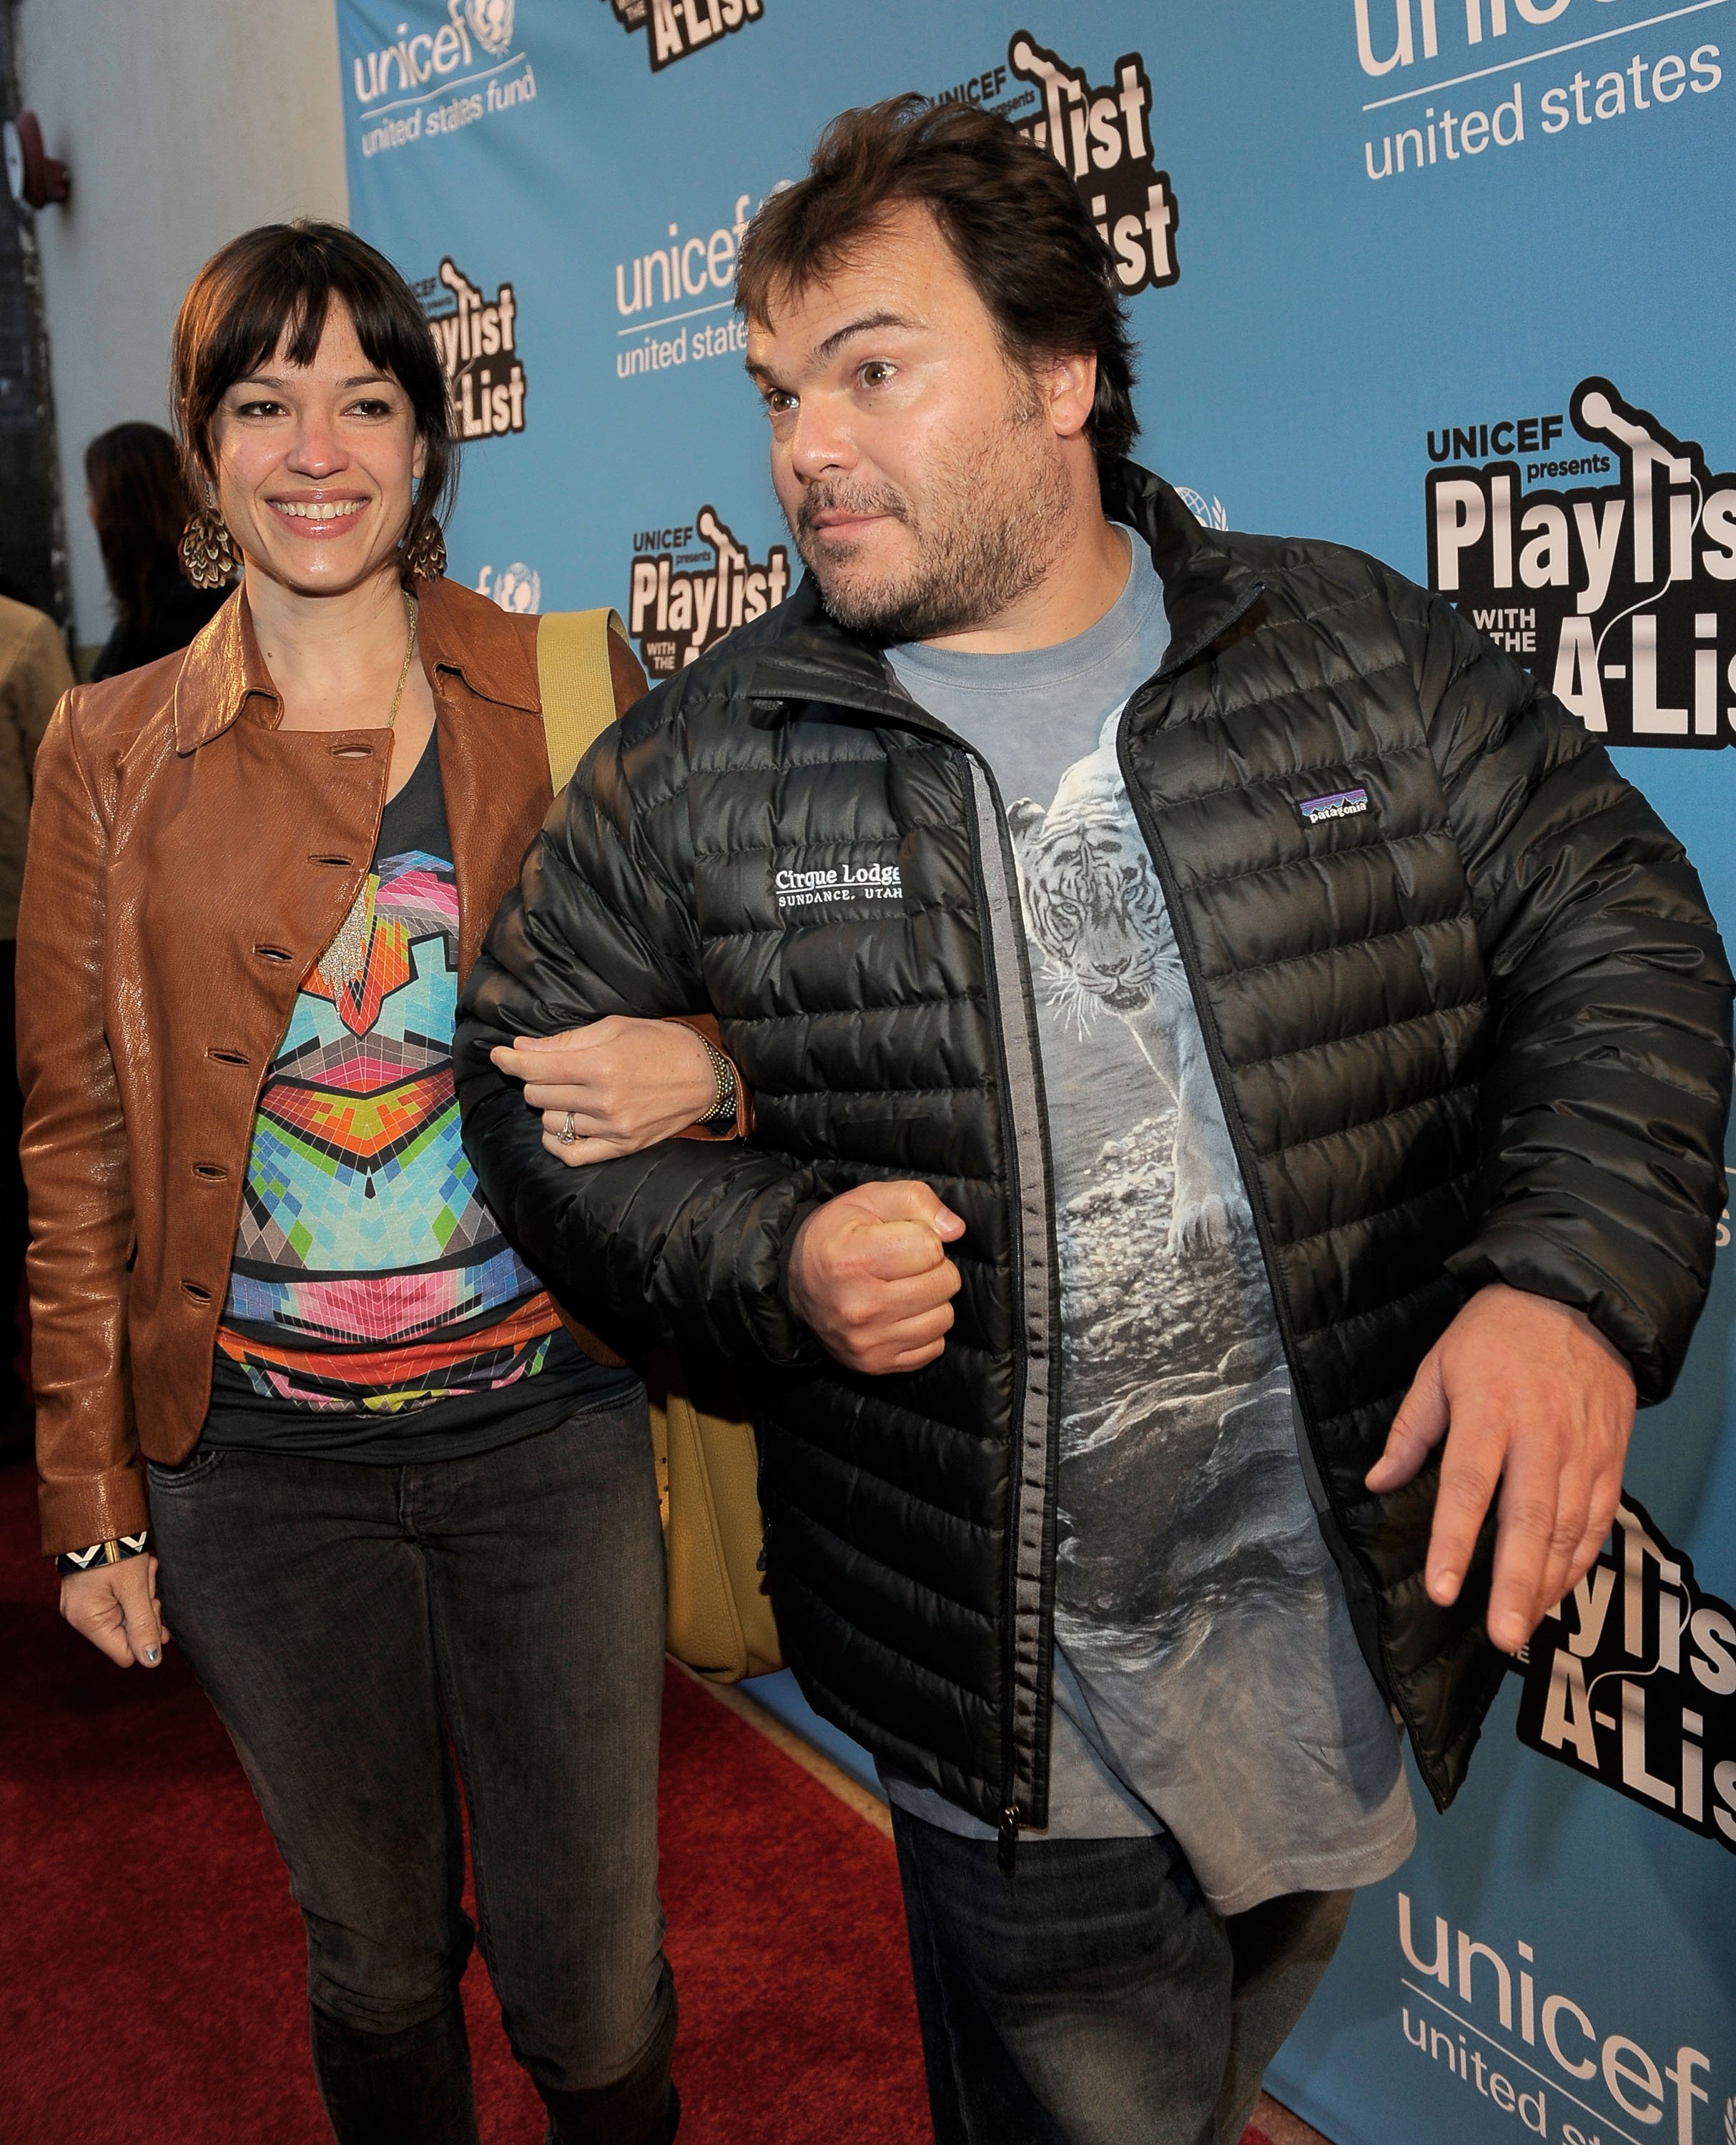 Actor Jack Black and Tanya Haden arrive at the UNICEF Playlist with the A-List celebrity karaoke benefit at El Rey Theatre on May 17, 2011, in Los Angeles, California. | Source: Getty Images 